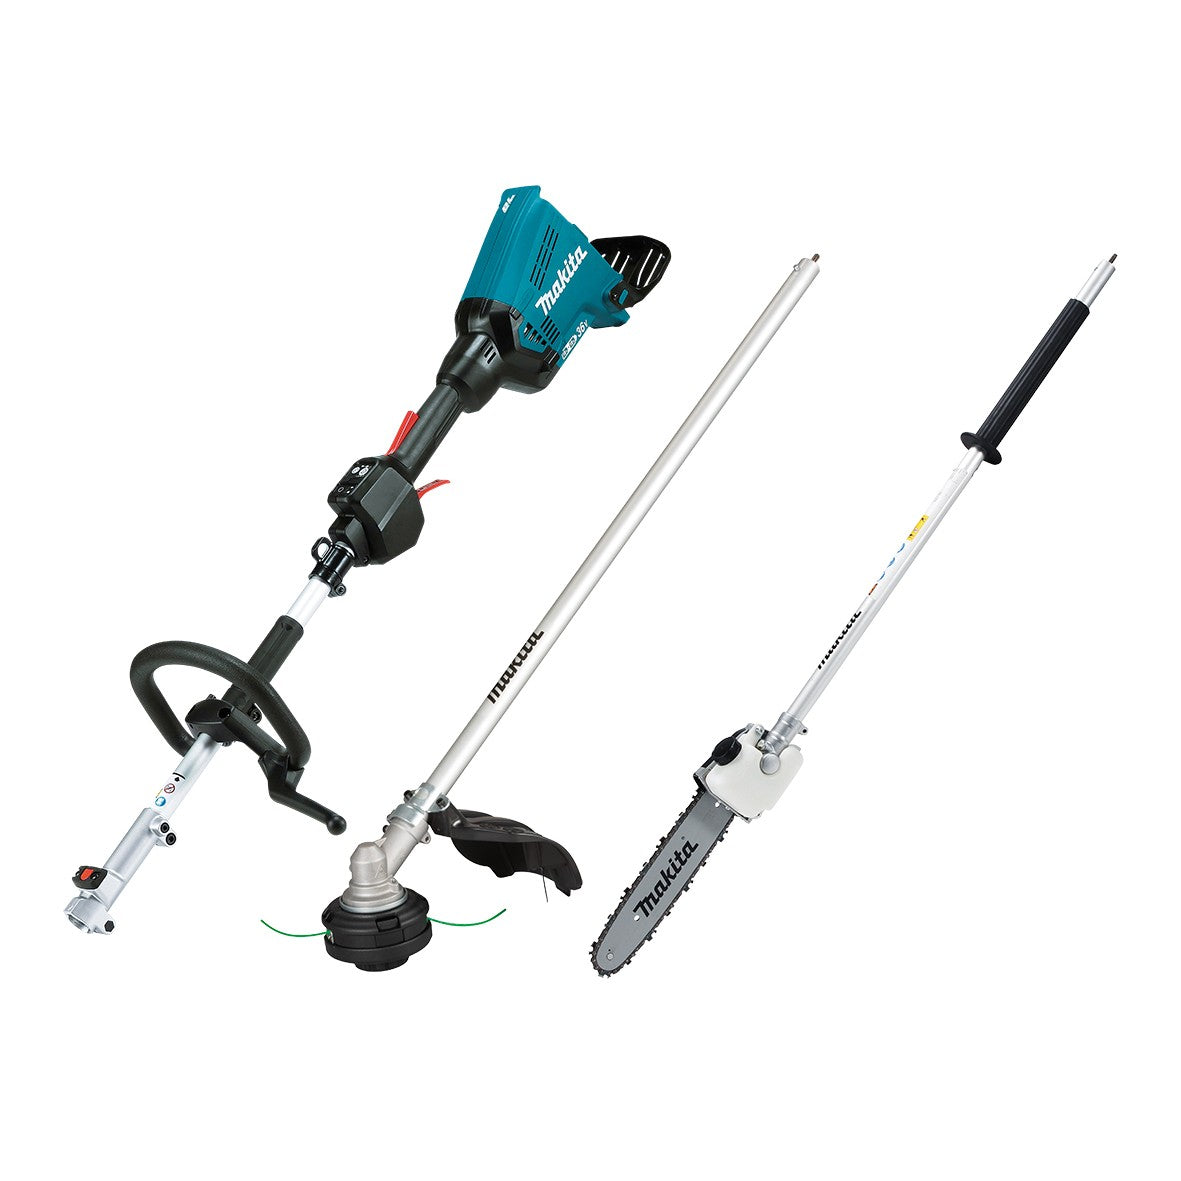 36V (18V x 2) Brushless Multi-Function Powerhead, Line Trimmer & Pole Saw Bare (Tool Only) DUX60ZX17 by Makita